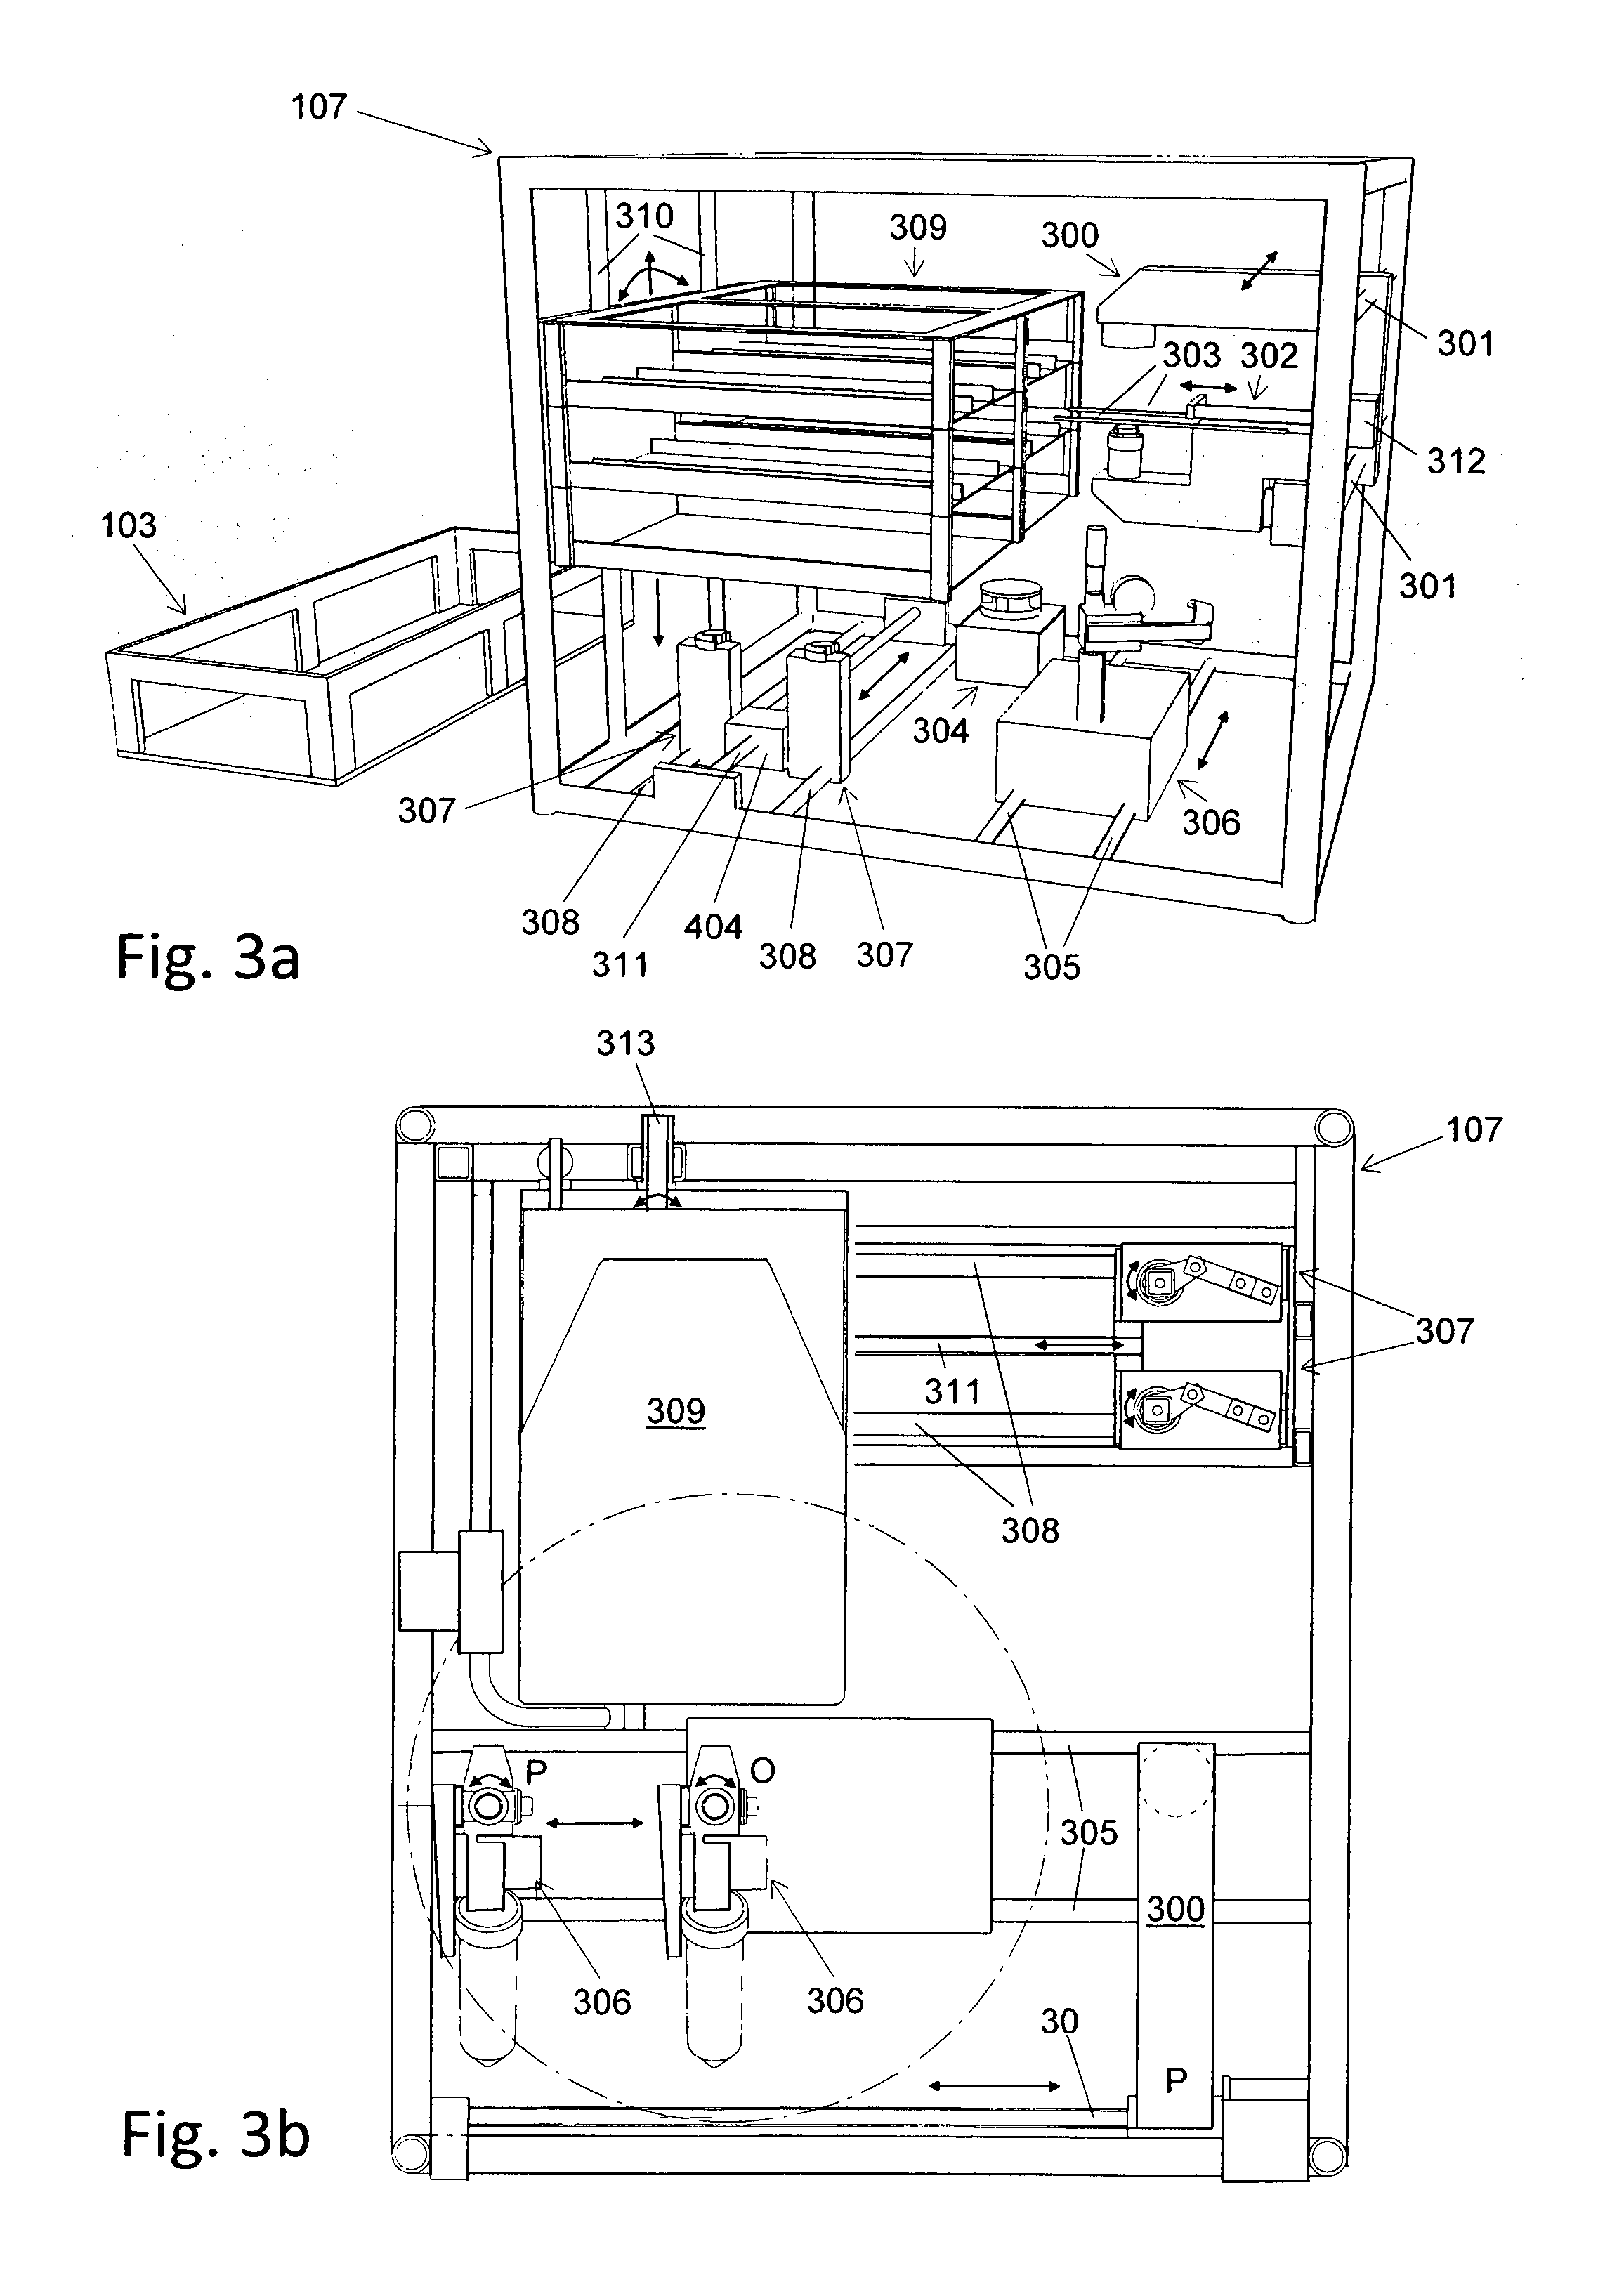 Automated cell culture system